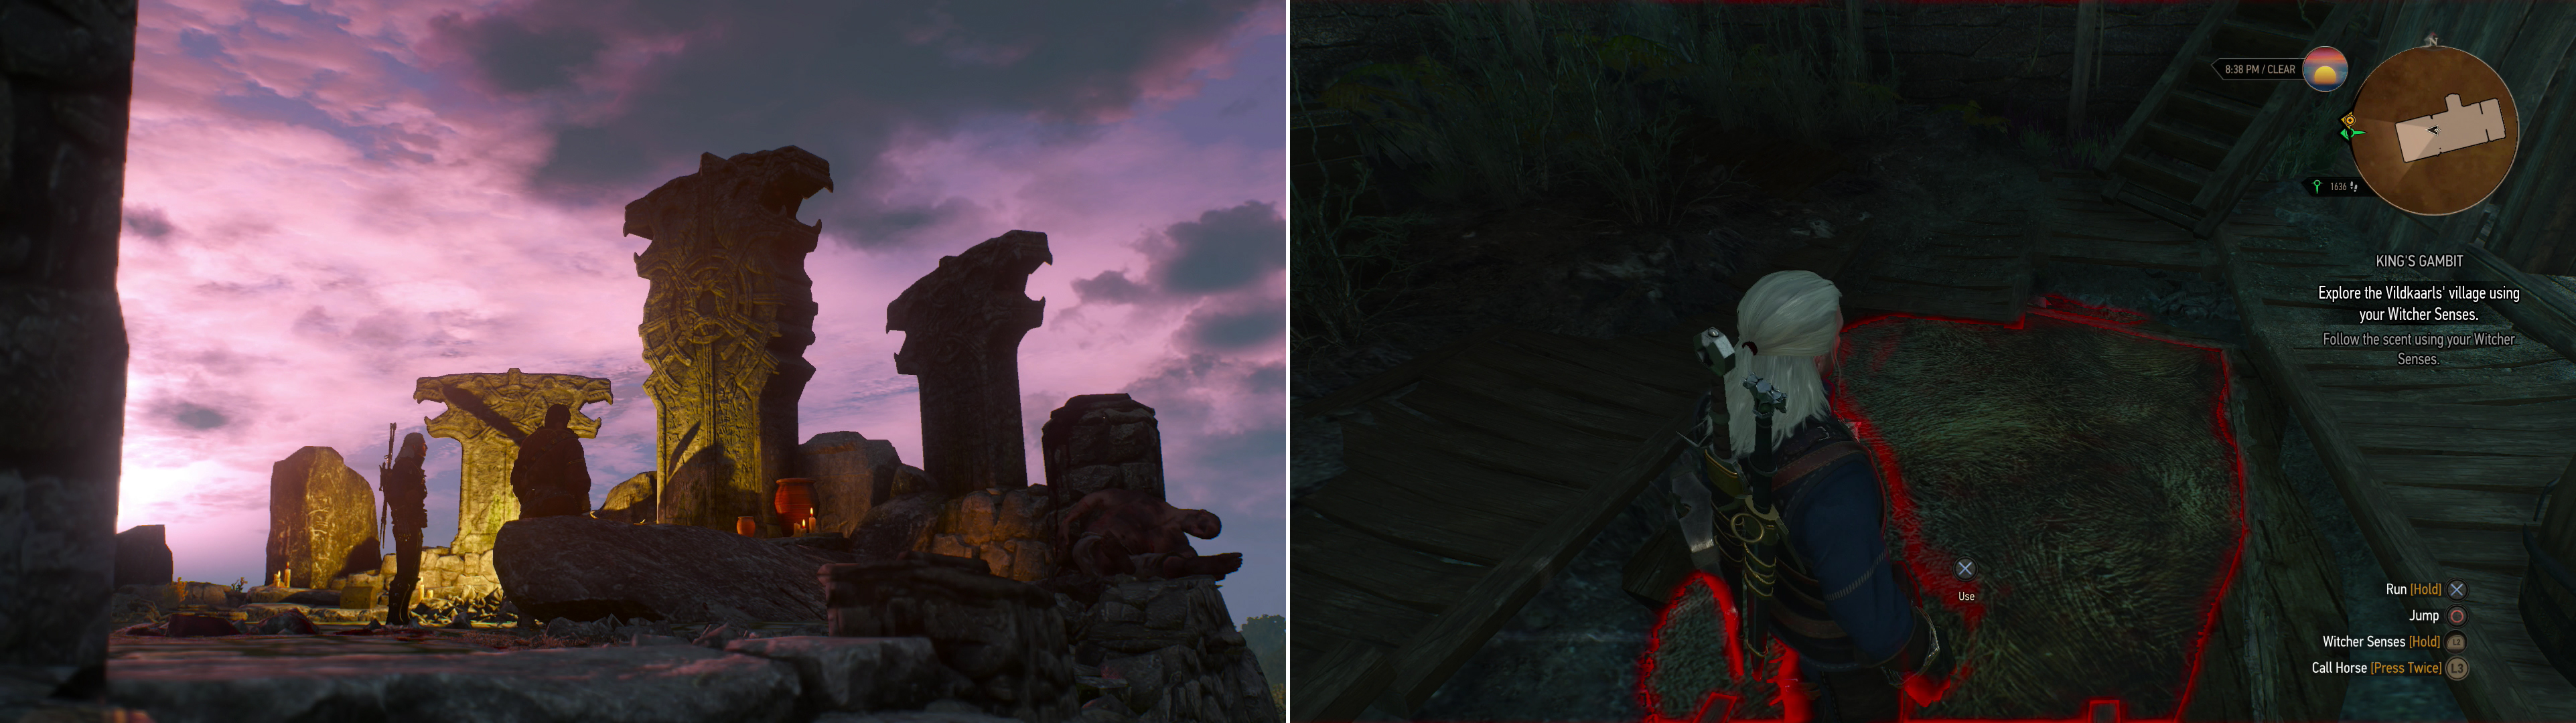 In the village of Fornhala, Geralt and Hjalmar will discover a shrine to Svalblod-a god so fierce, even the Skelligers don’t worship him (left). Find a hidden trapdoor in one of the houses (right).